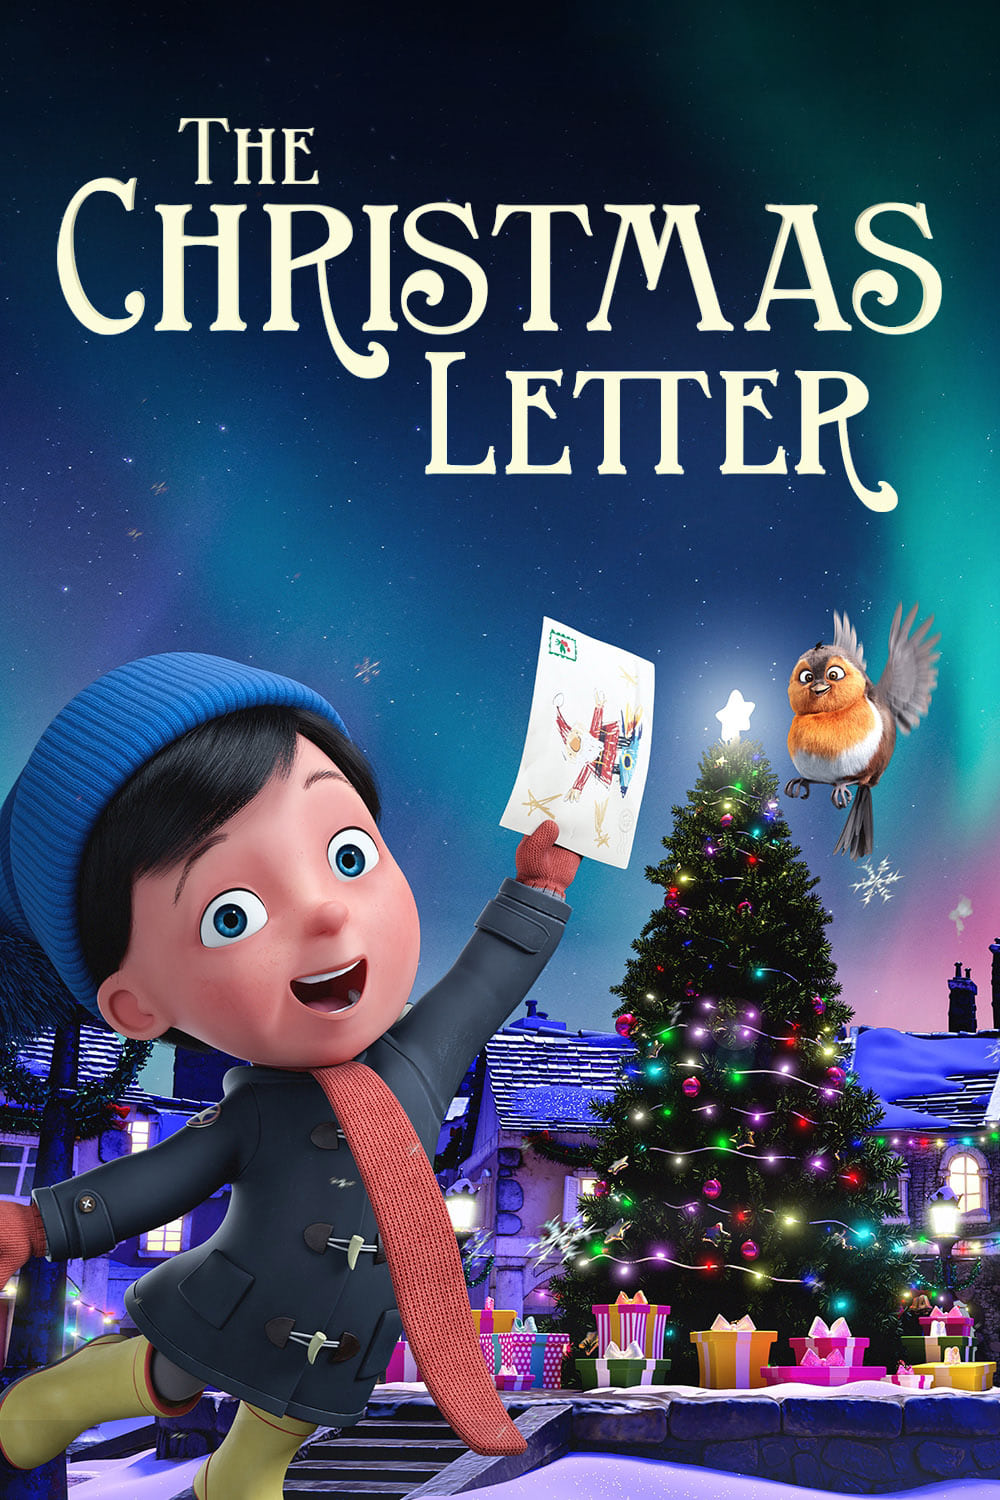 The Christmas Letter (2019)